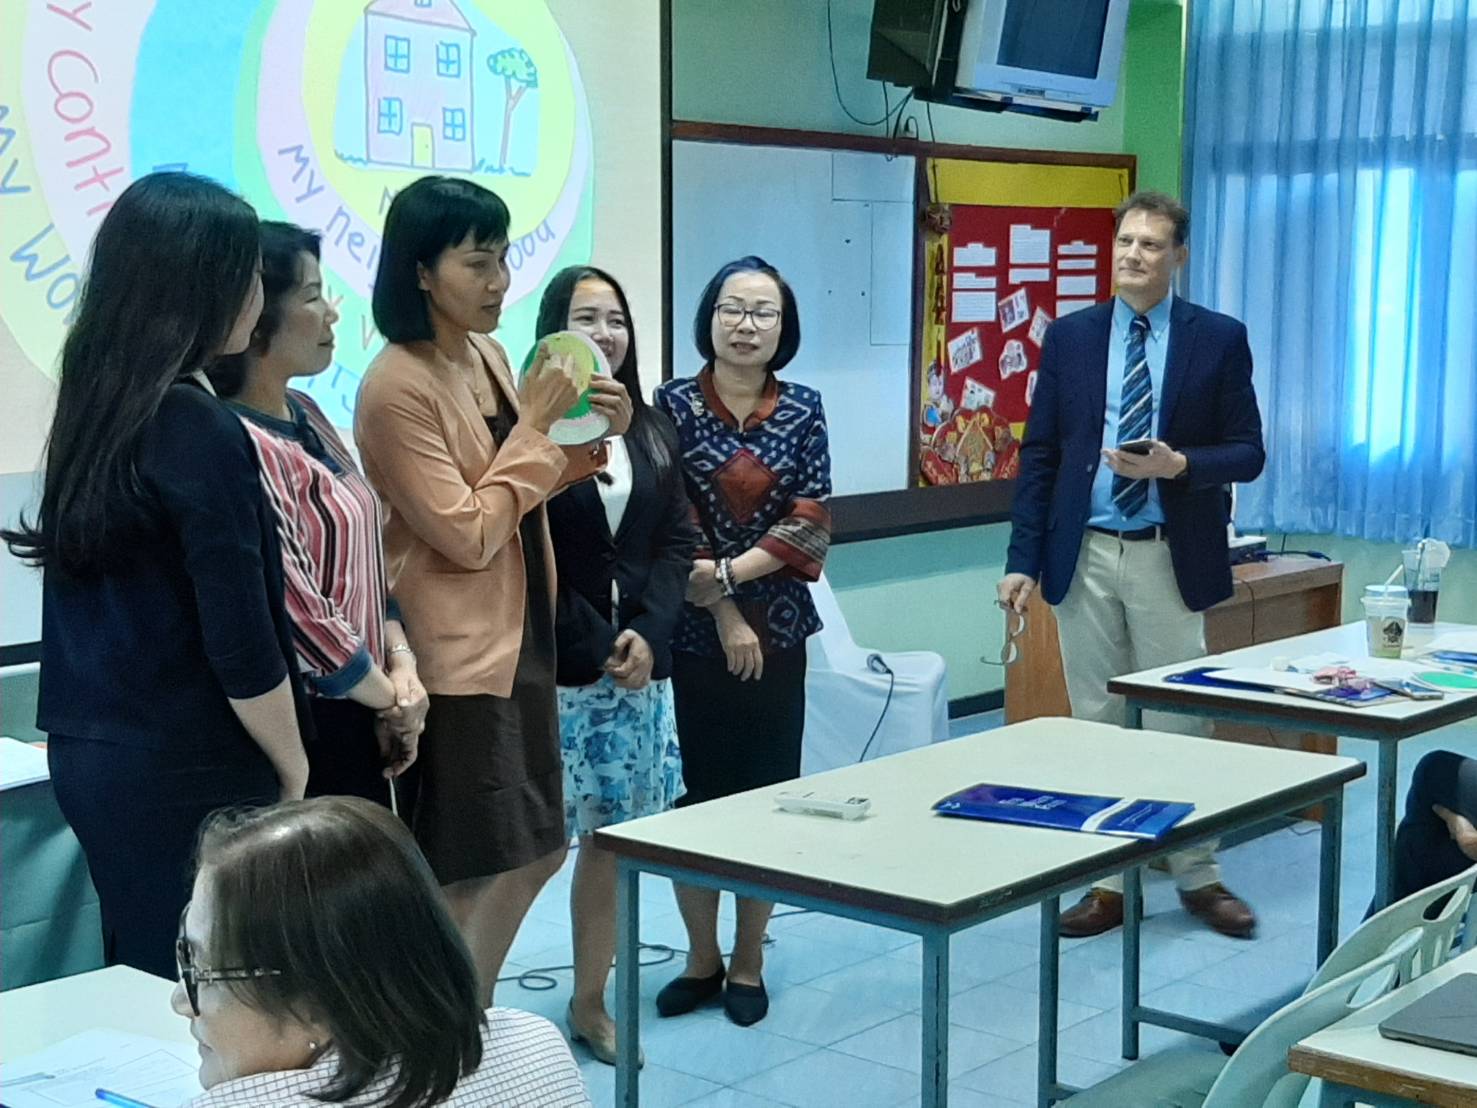 Focus and Move it : Putting the course materials into action at Singsamut School, Chon Buri